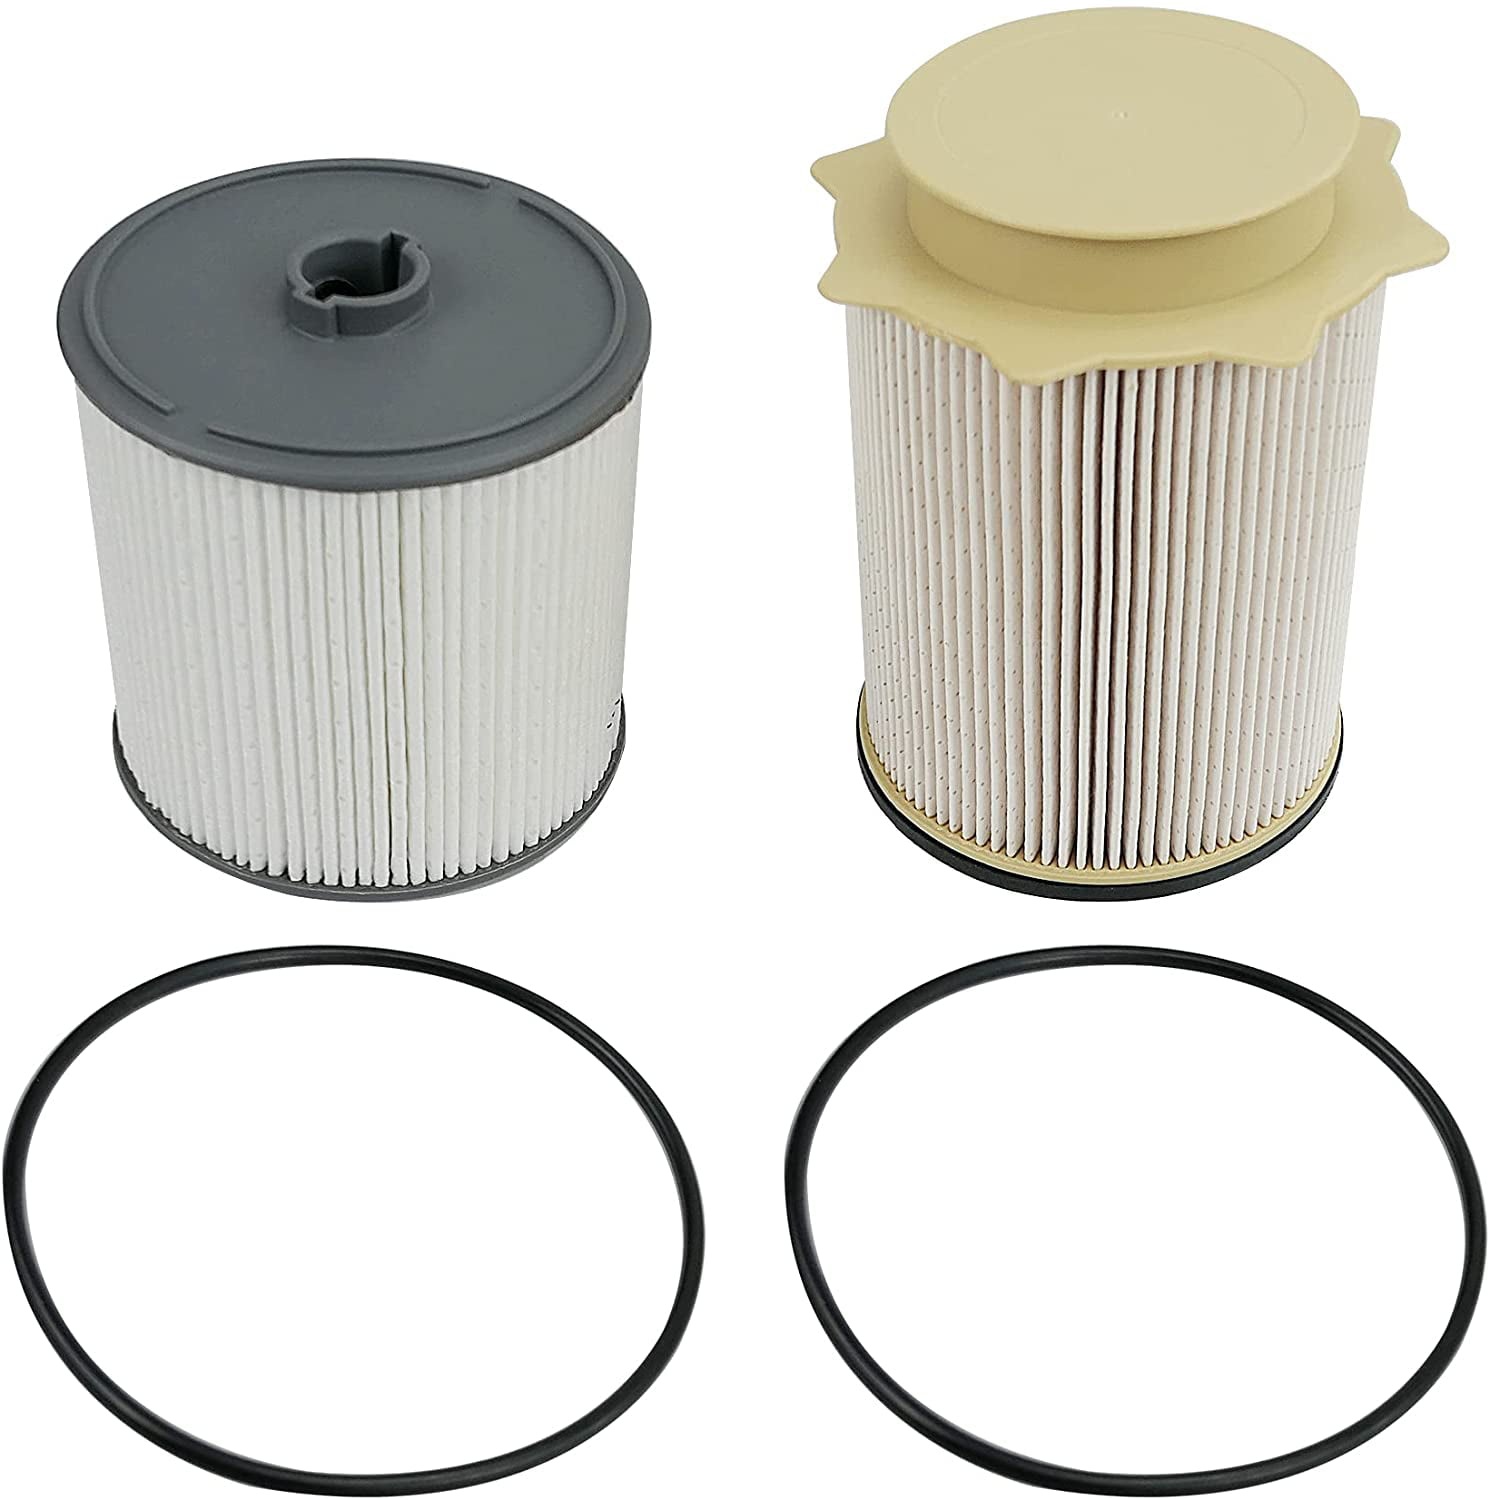 Fits for Dodge Ram 2019 2020 2021 6.7L Cummins Diesel 2500 3500 4500 5500 Fuel Filter Water Separator Set Replaces# 68157291AA and 68436631AA 